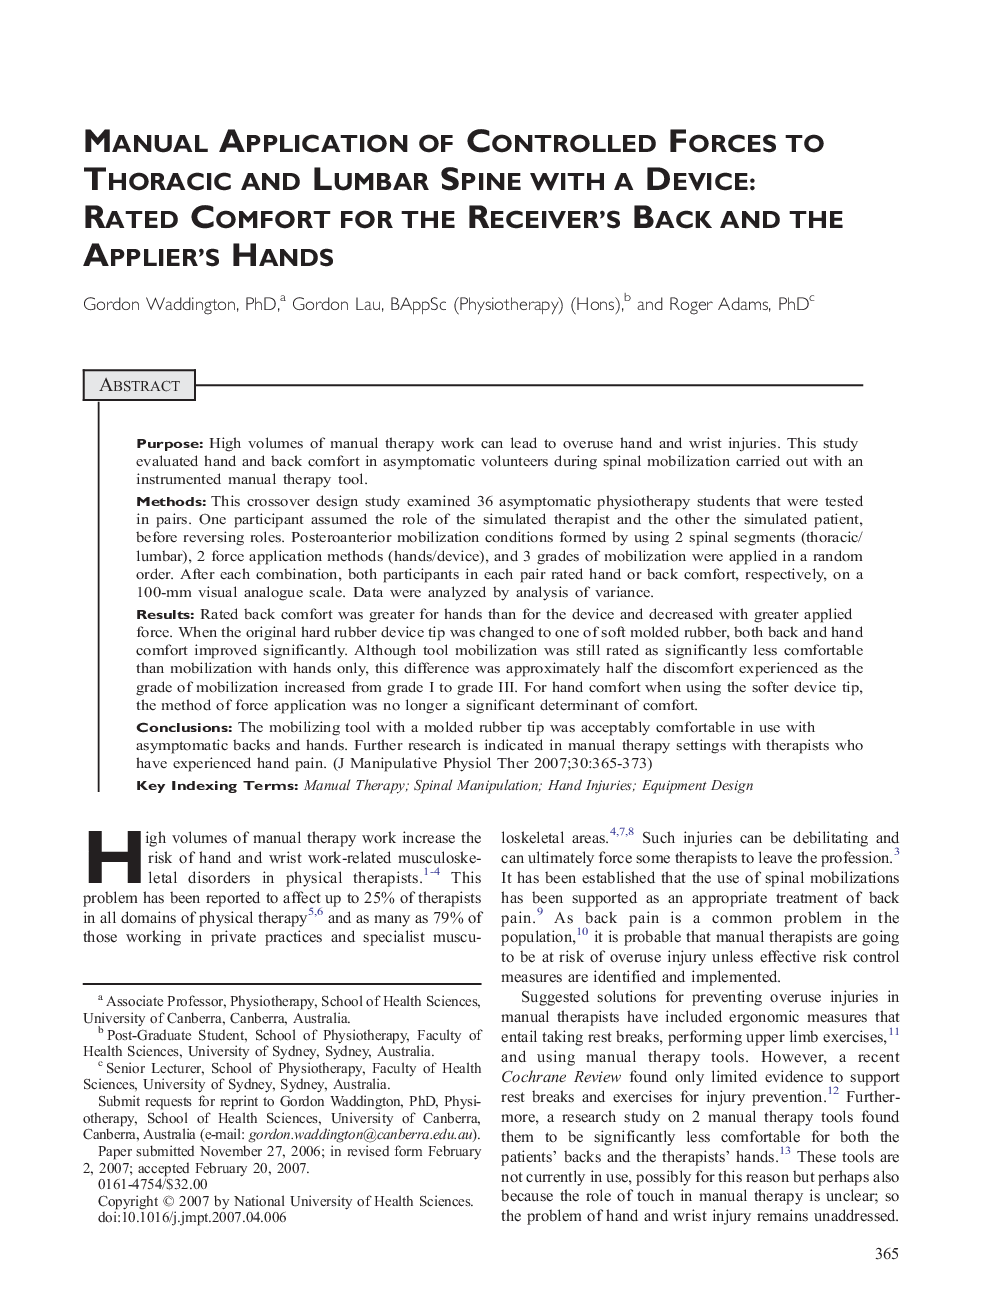 Manual Application of Controlled Forces to Thoracic and Lumbar Spine With a Device: Rated Comfort for the Receiver's Back and the Applier's Hands